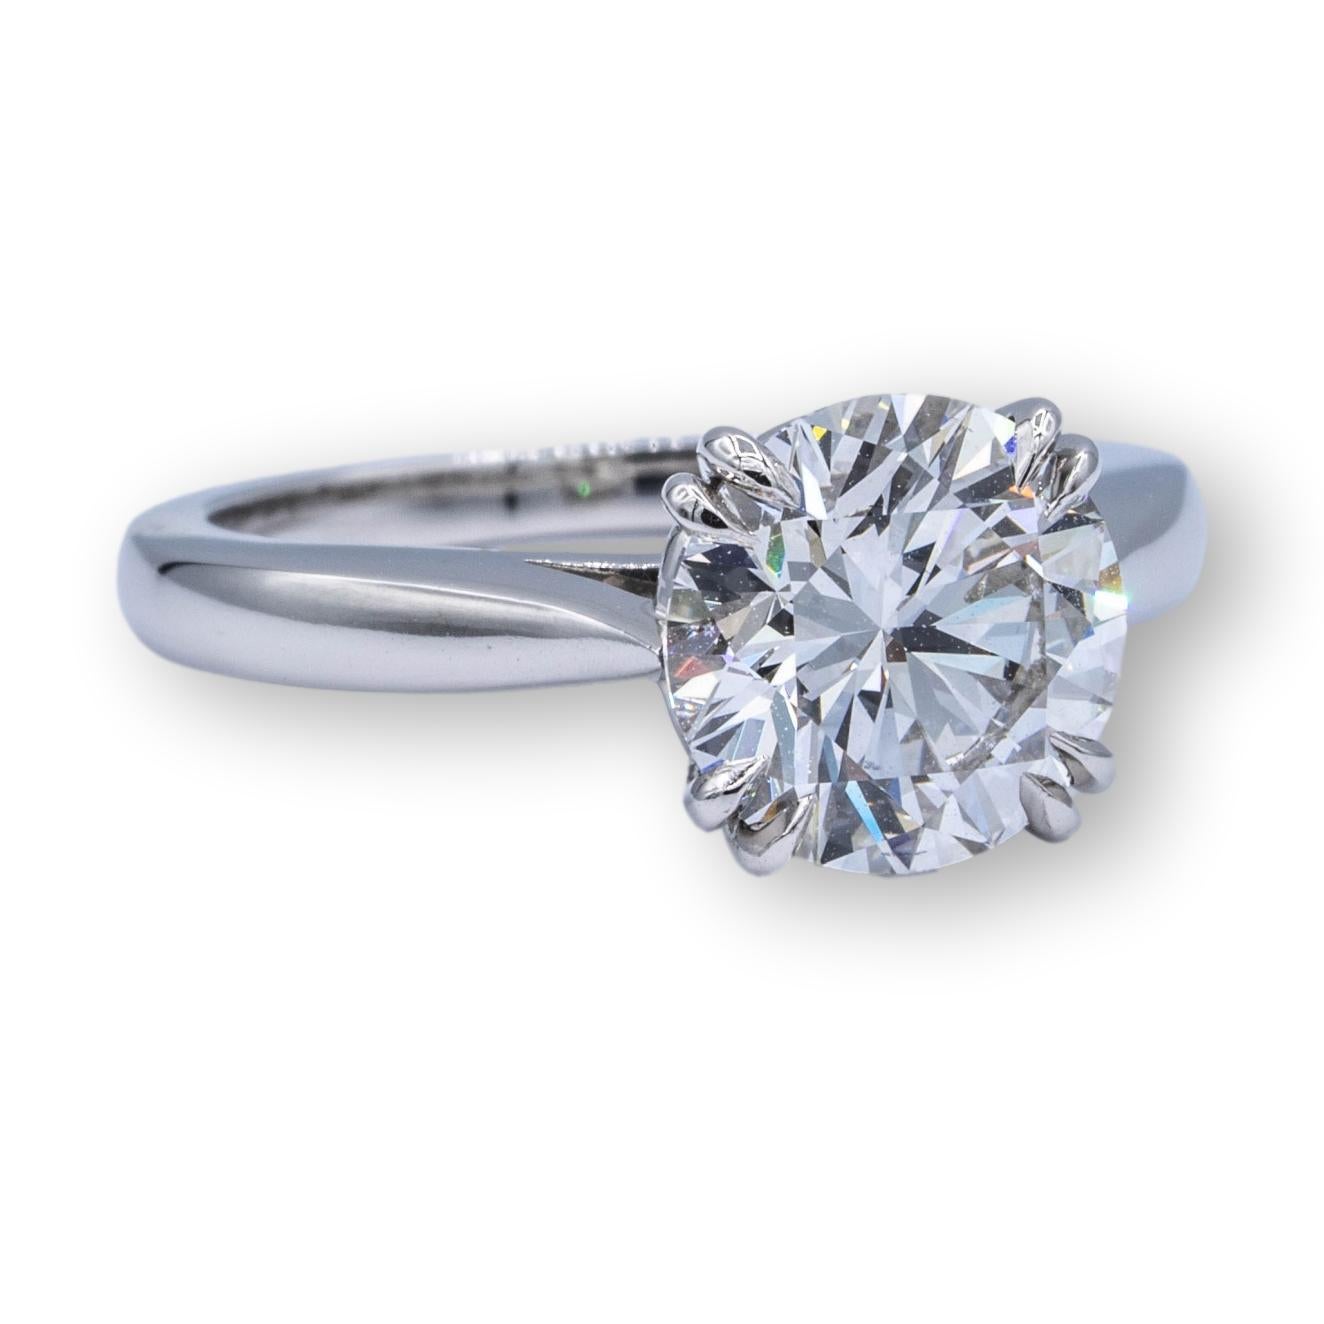 Harry Winston Solitaire Diamond Engagement ring finely crafted in platinum with a fine GIA Certified round center diamond set in double claw prongs weighing 1.61 cts. F color VS1 clarity . Excellent cut, polish and symmetry.  This Harry Winston ring